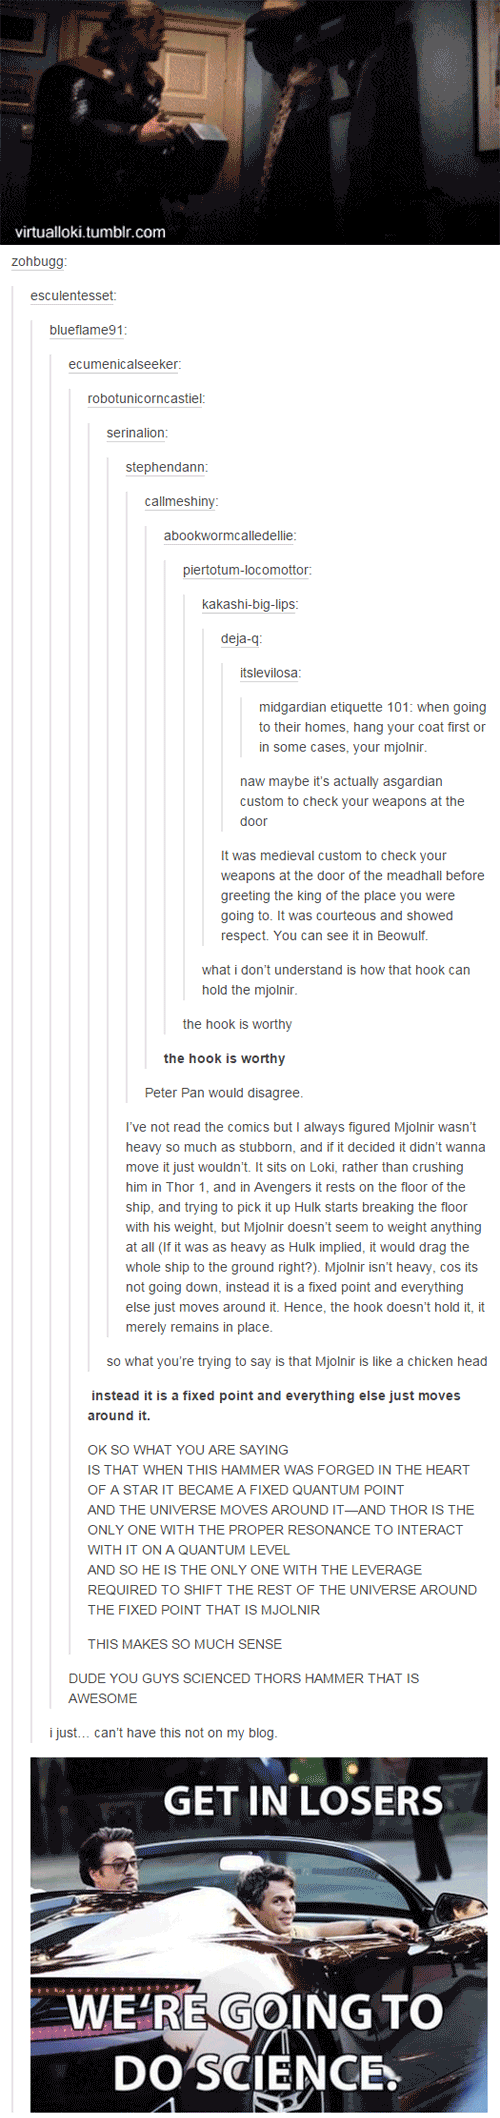 tumblr - book - Get In Losers We'Rf Going To Do Science